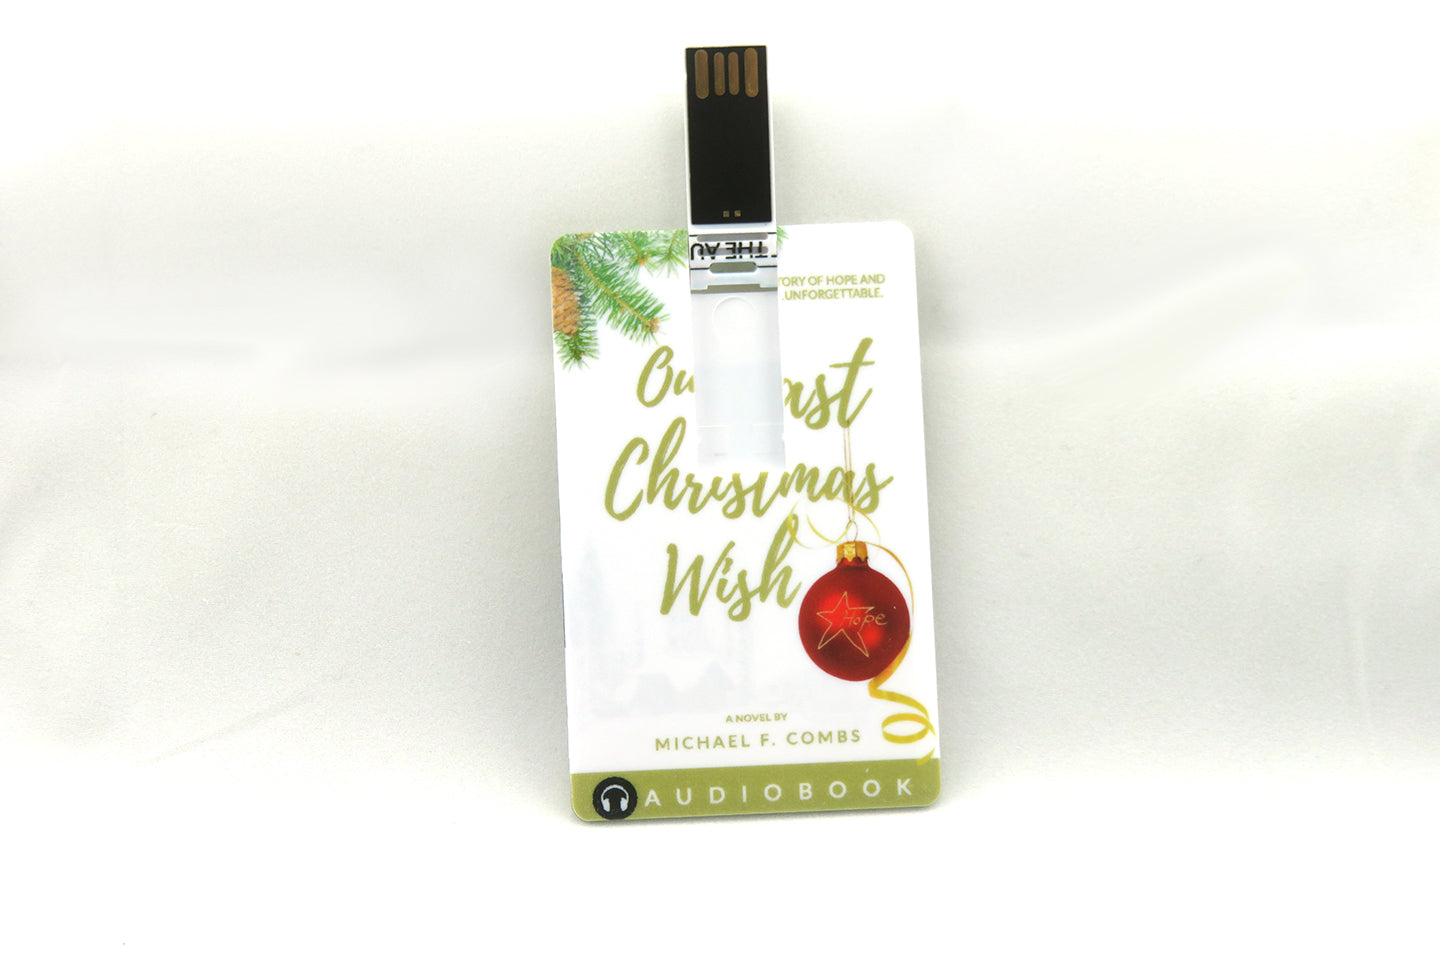 Our Last Christmas Wish - SPECIAL EDITION PACKAGE